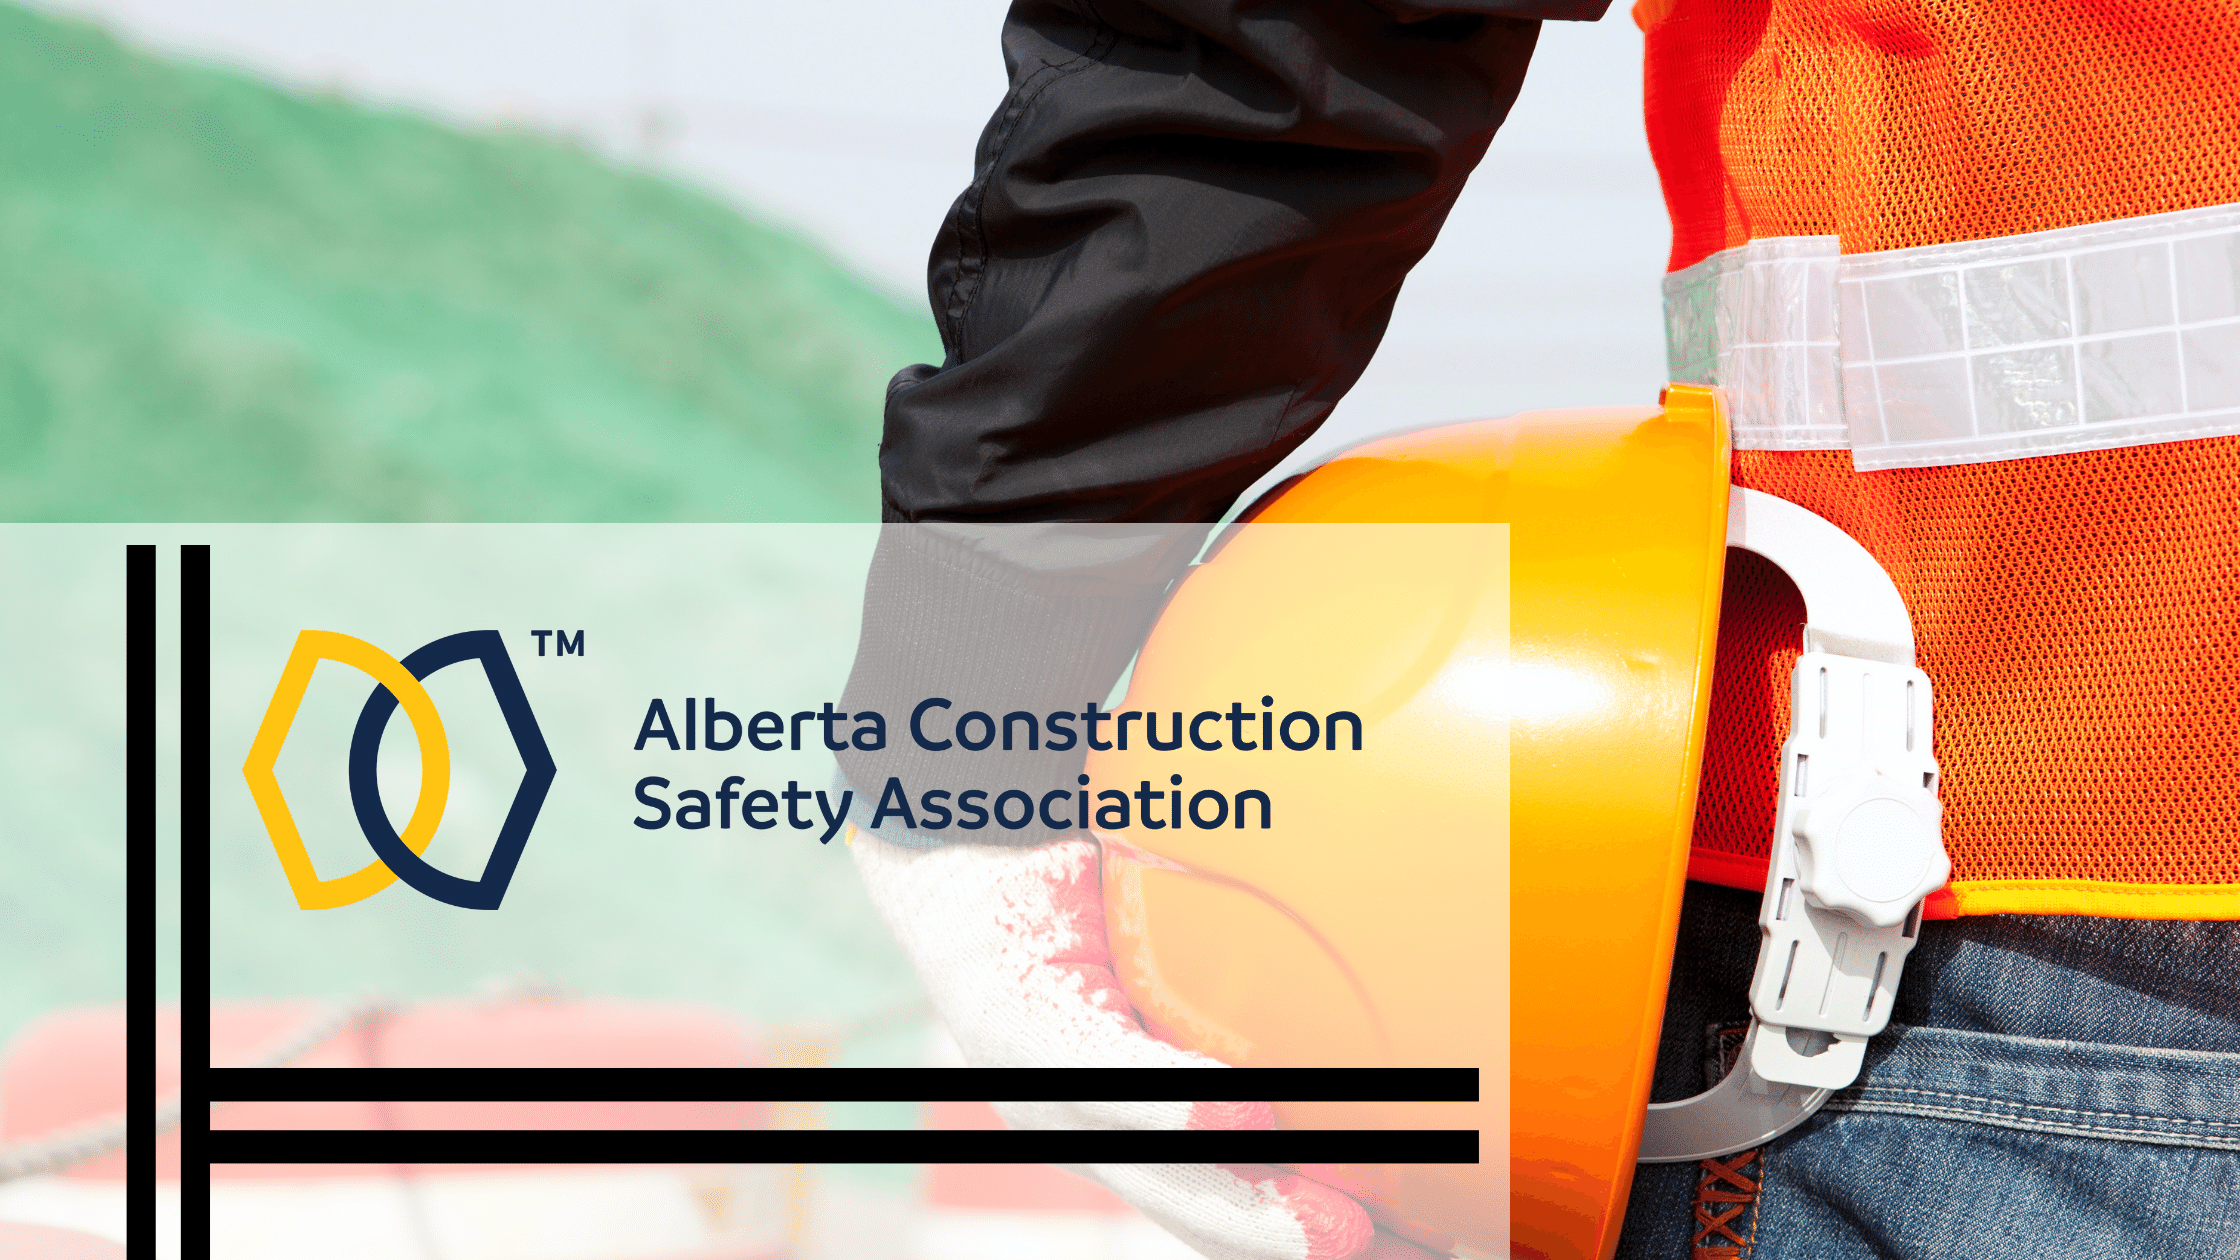 Alberta’s trusted source for the highest construction safety standards, recognized Canada wide.